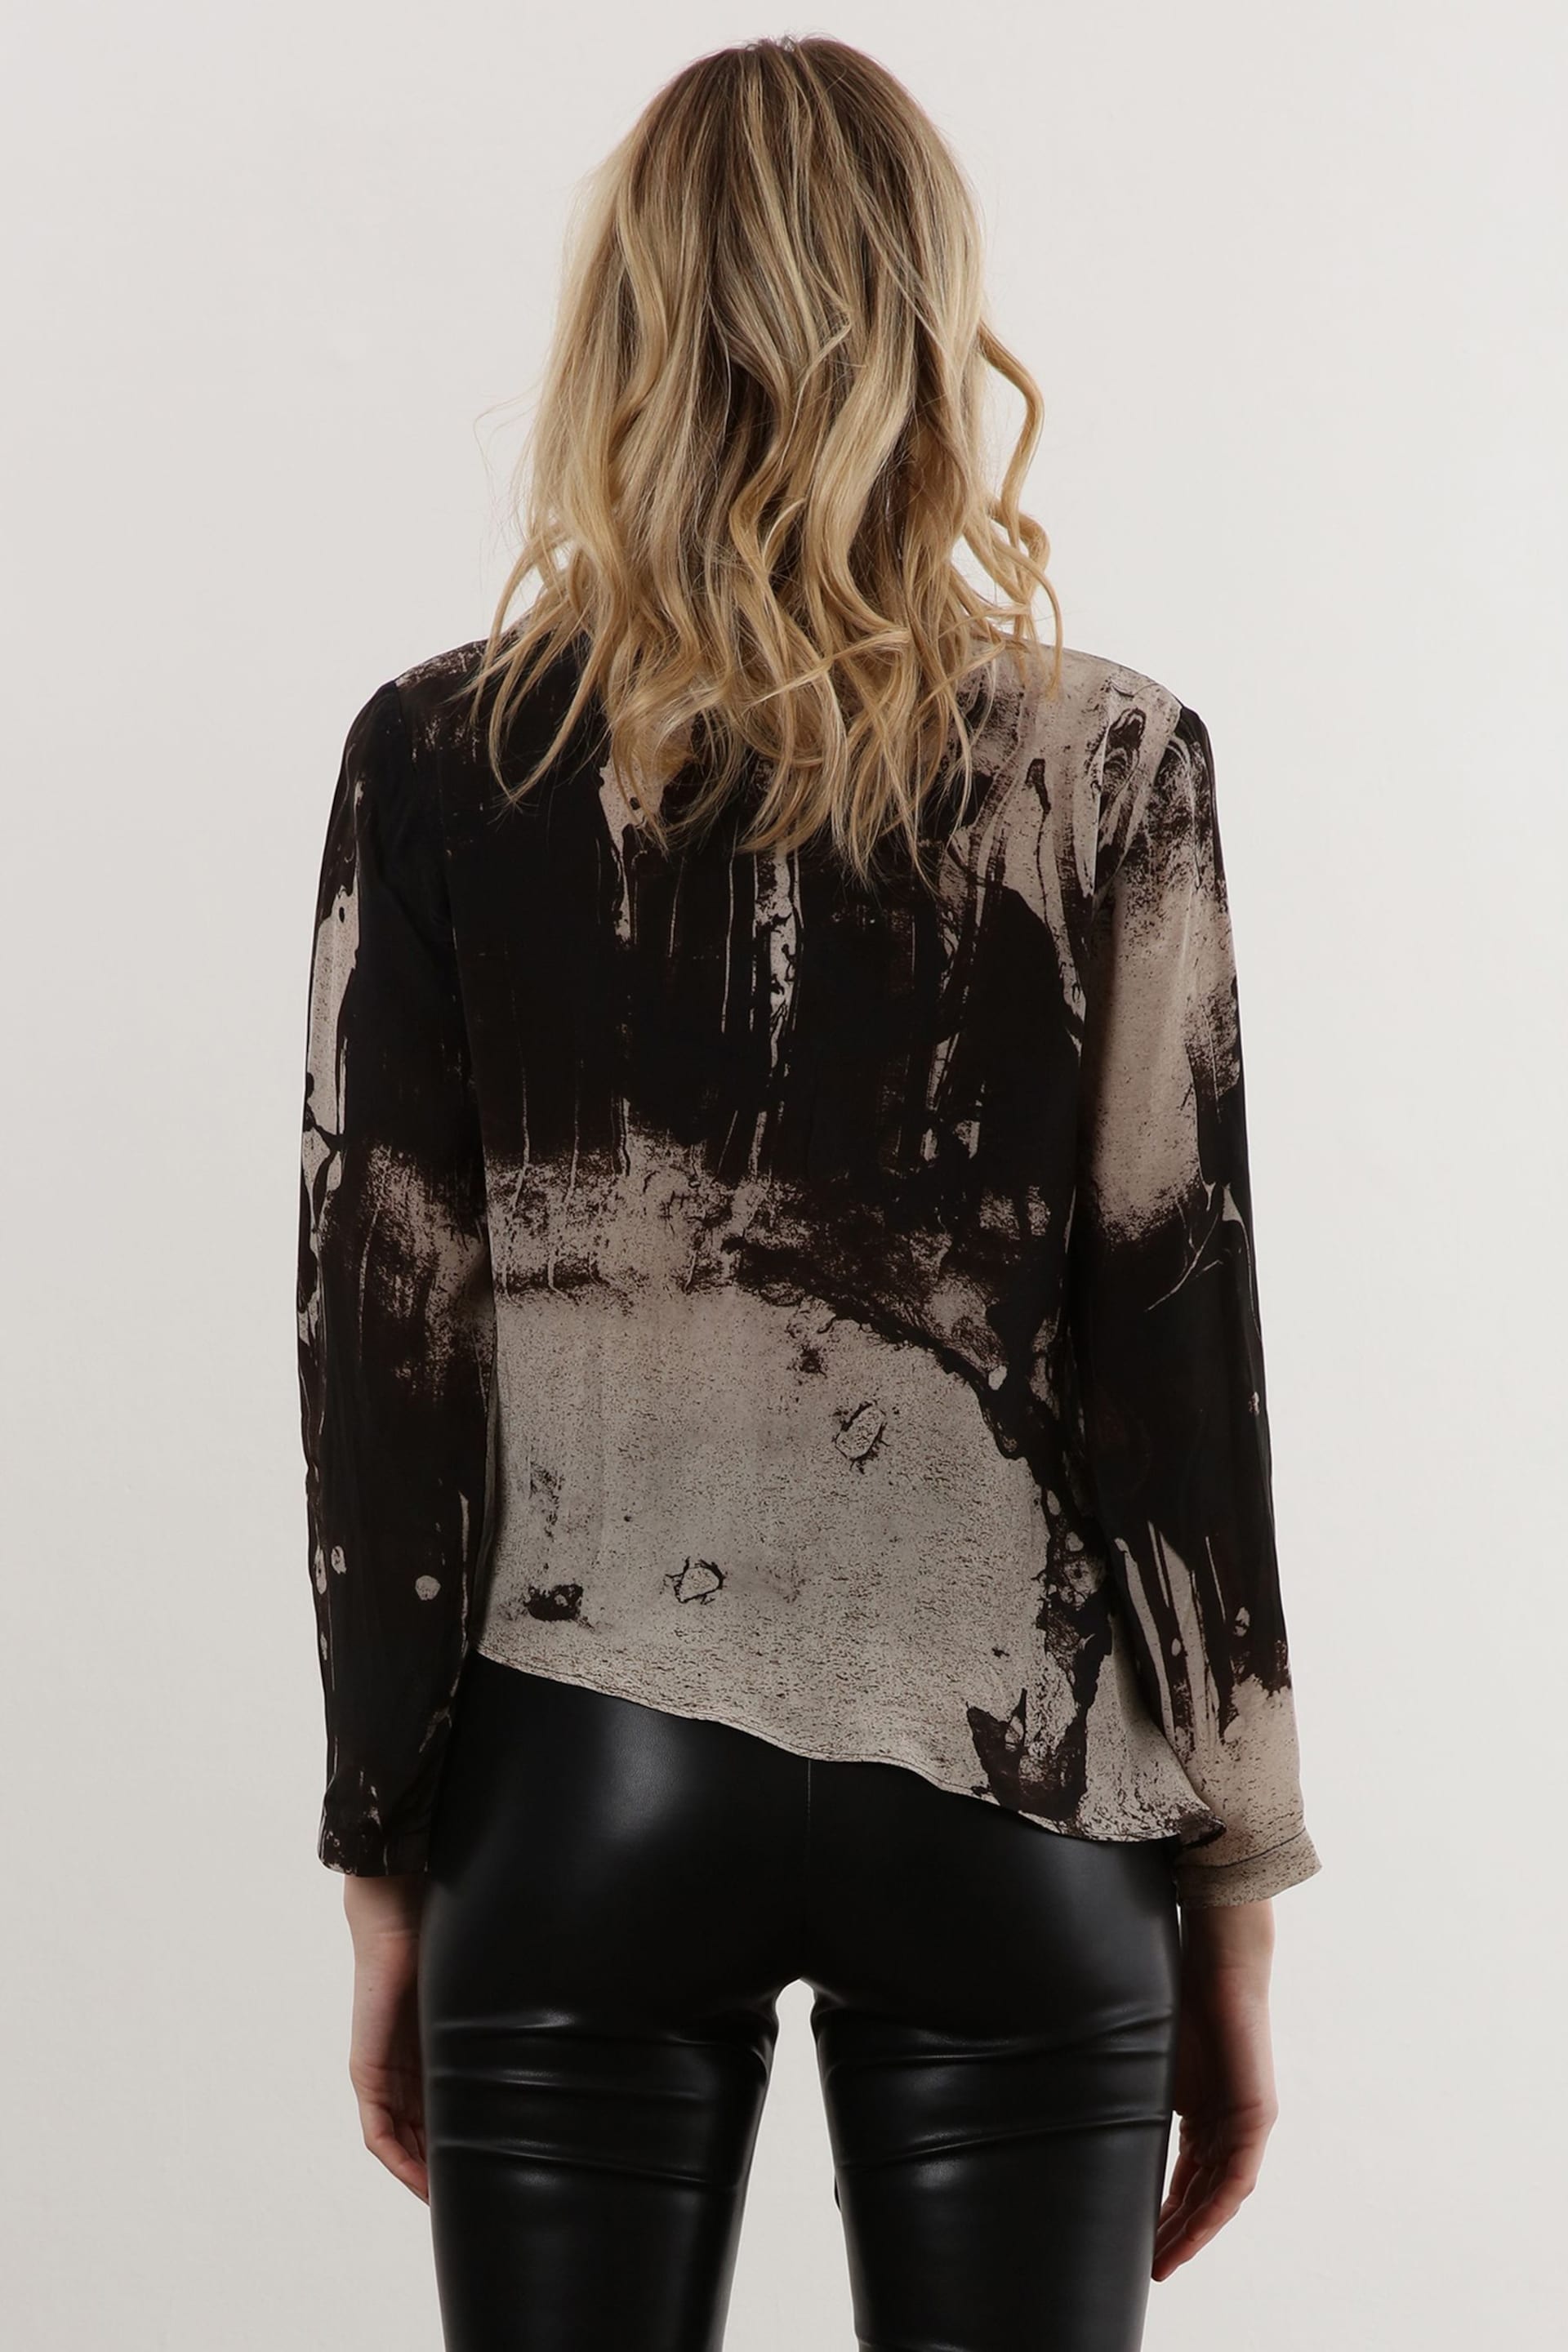 Religion Black Print Long Sleeve Tie Front Double Layer Top - Image 2 of 6